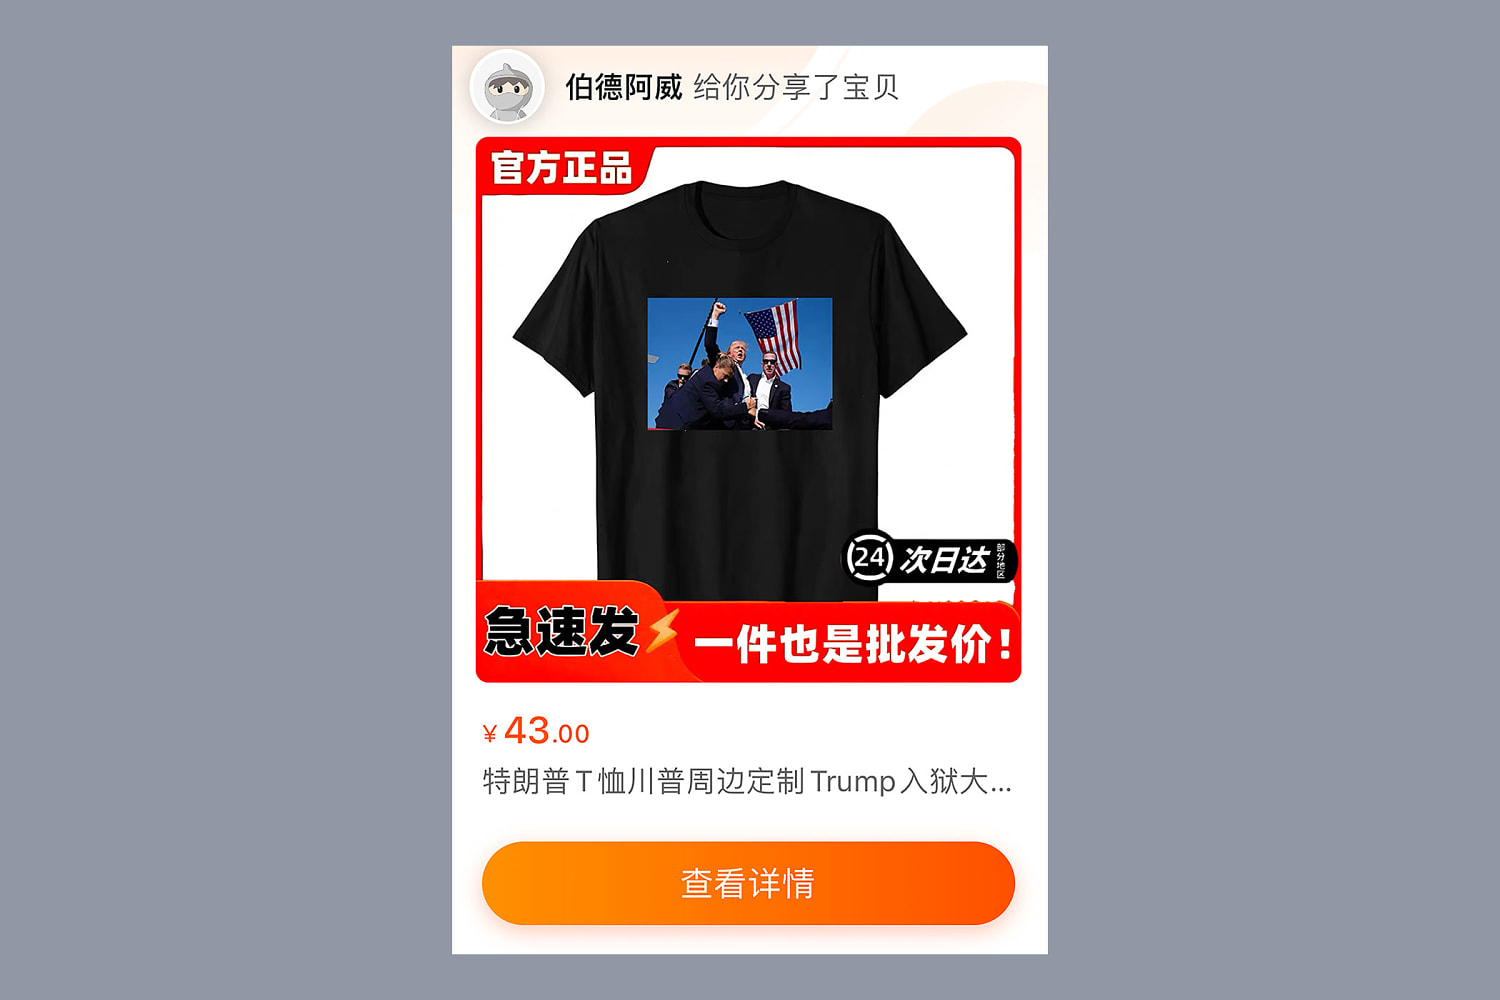 Trump T-shirts listed on Chinese retail sites moments after assassination attempt have disappeared